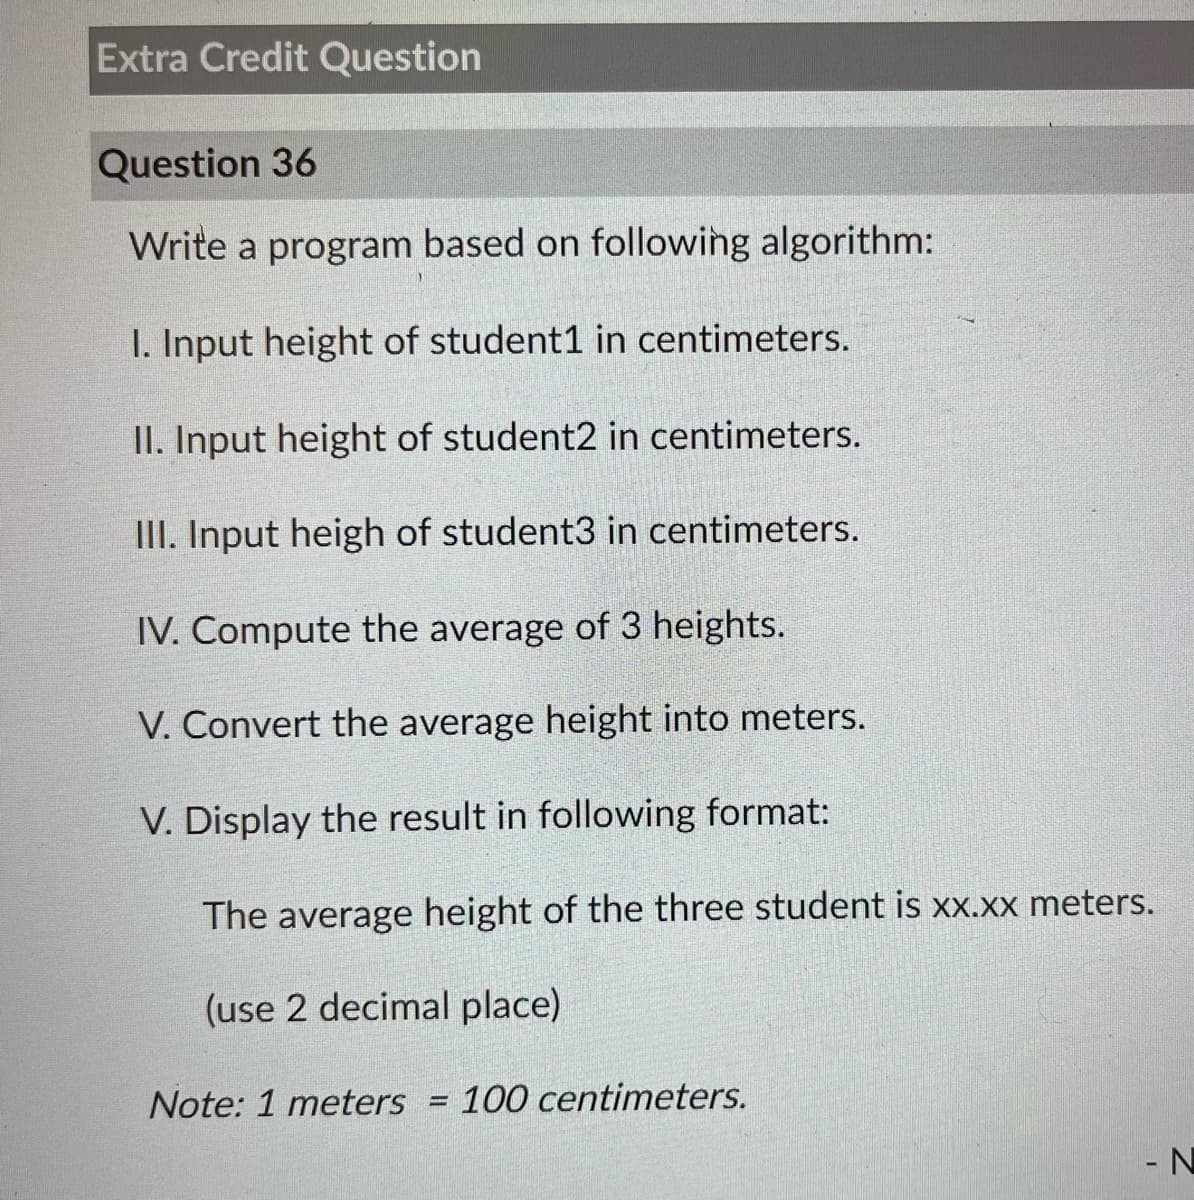 Extra Credit Question
Question 36
Write a program based on following algorithm:
I. Input height of student1 in centimeters.
II. Input height of student2 in centimeters.
III. Input heigh of student3 in centimeters.
IV. Compute the average of 3 heights.
V. Convert the average height into meters.
V. Display the result in following format:
The average height of the three student is xx.xx meters.
(use 2 decimal place)
Note: 1 meters = 100 centimeters.
- N